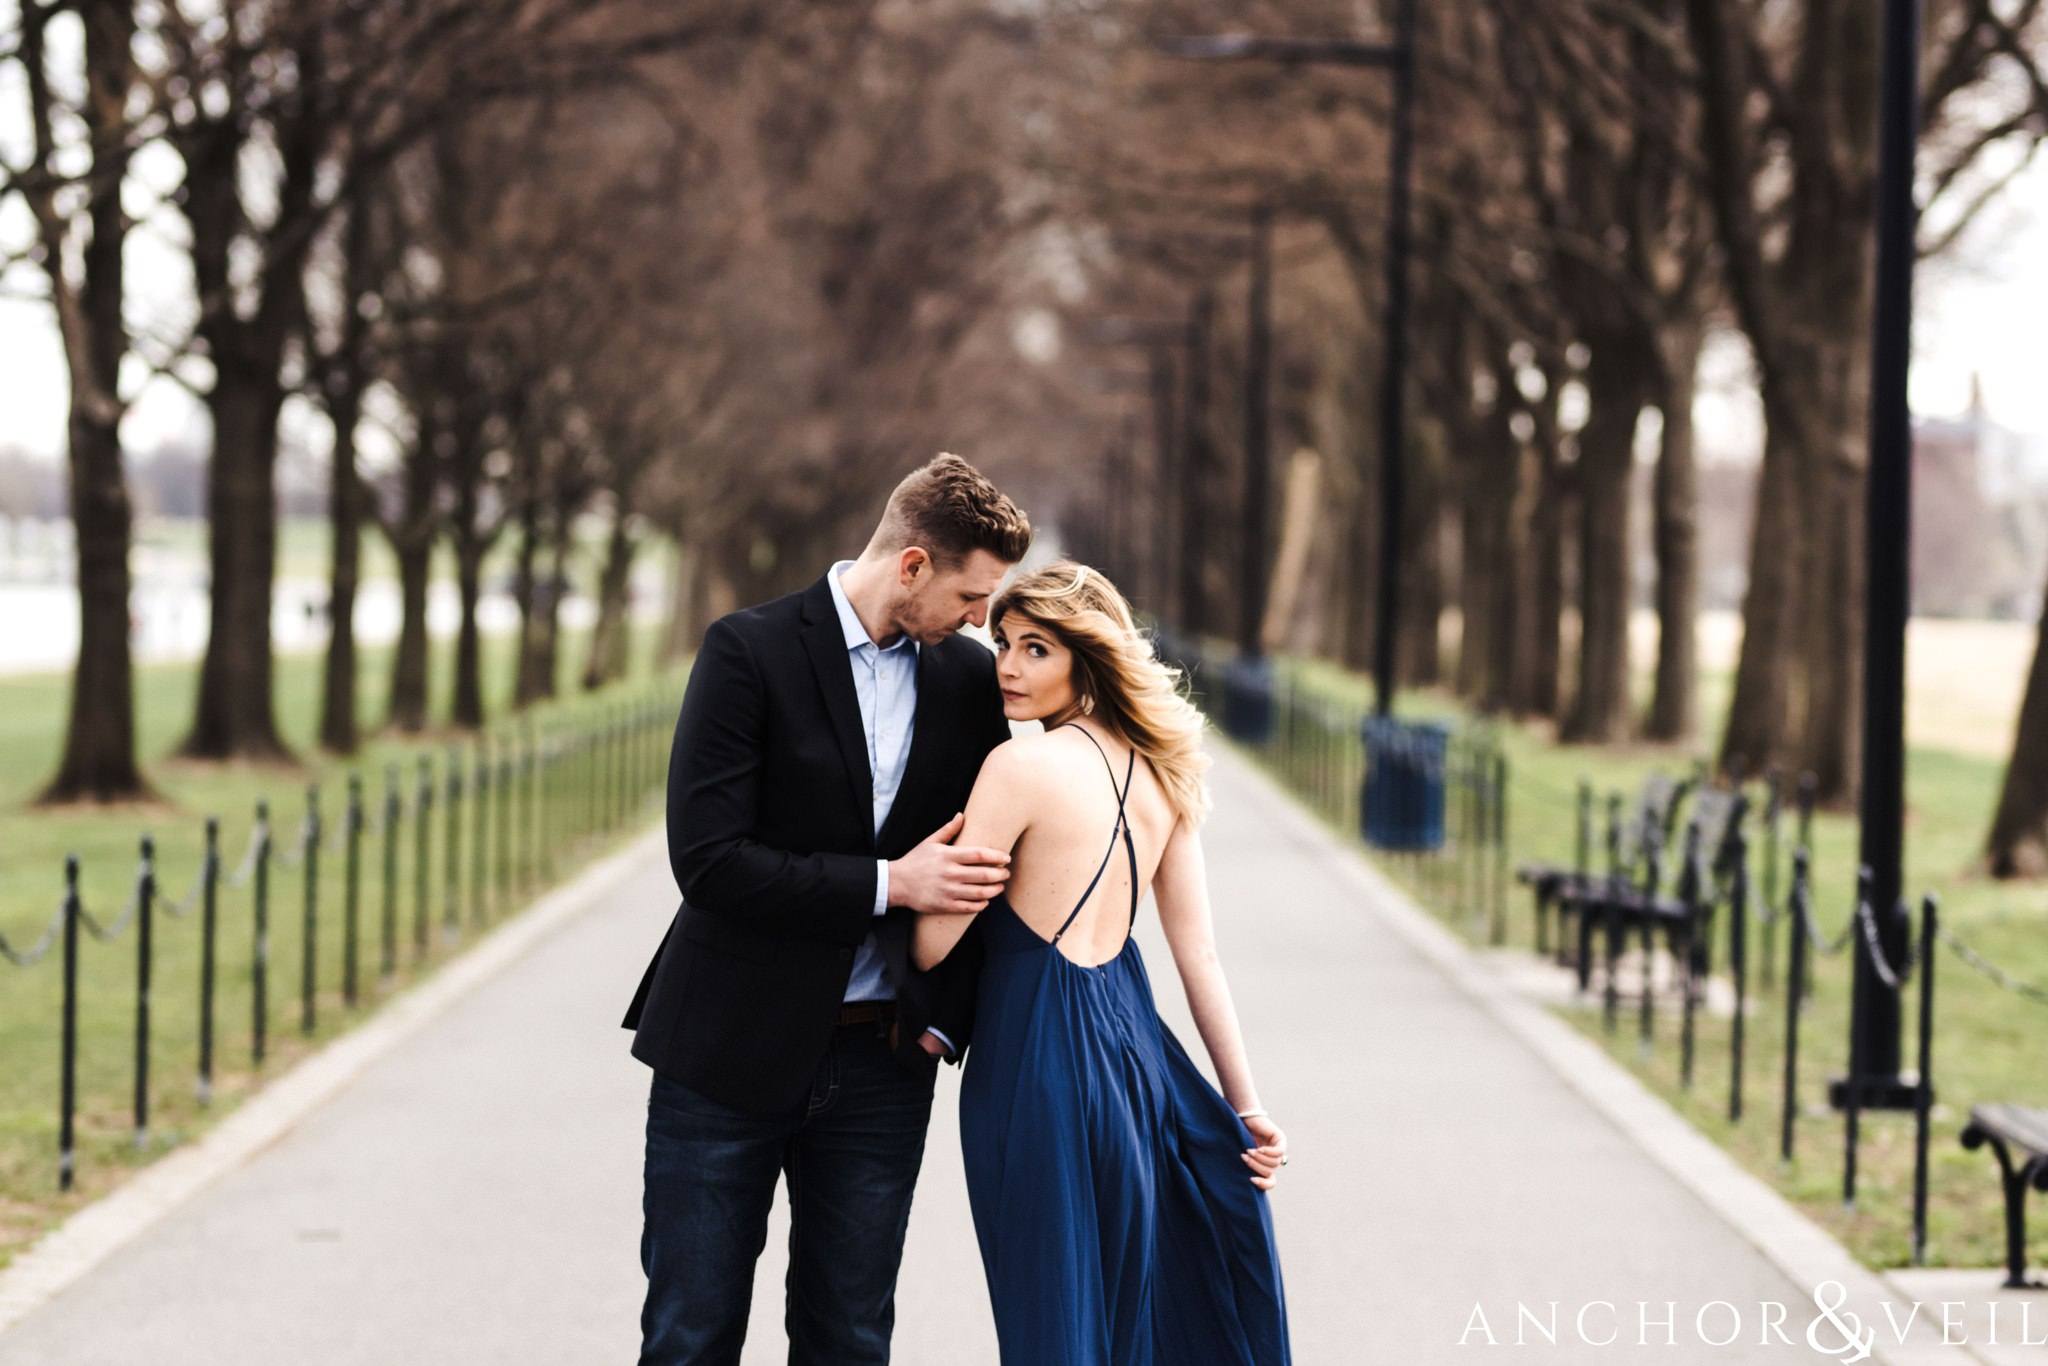 on the walkway of trees during their Scenic Washington DC Engagement Session